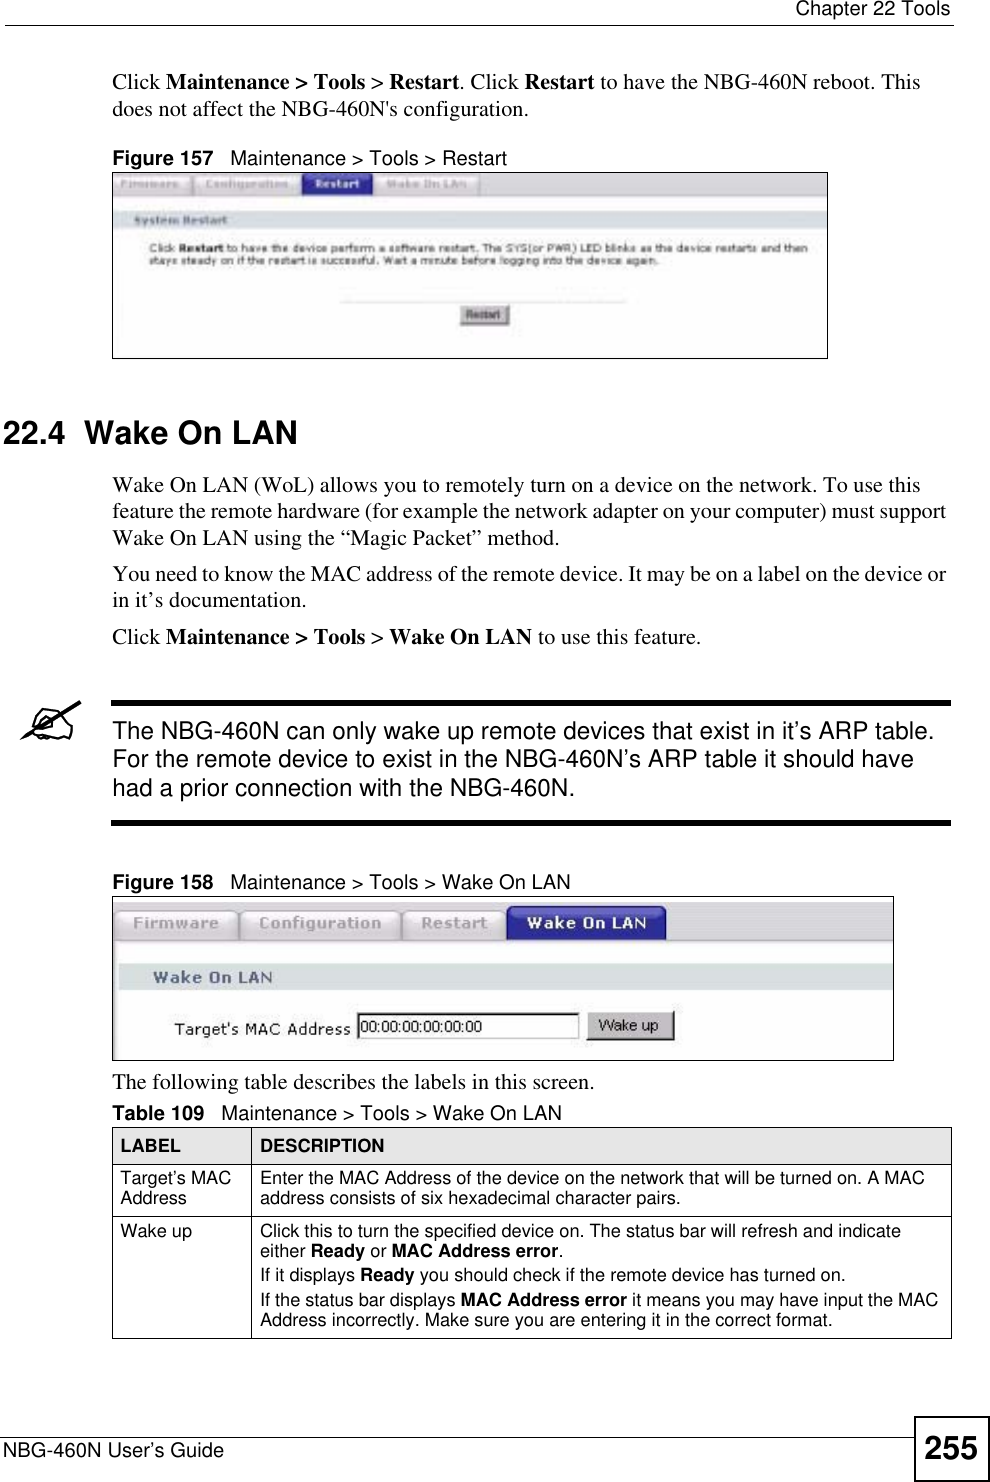  Chapter 22 ToolsNBG-460N User’s Guide 255Click Maintenance &gt; Tools &gt; Restart. Click Restart to have the NBG-460N reboot. This does not affect the NBG-460N&apos;s configuration.Figure 157   Maintenance &gt; Tools &gt; Restart 22.4  Wake On LANWake On LAN (WoL) allows you to remotely turn on a device on the network. To use this feature the remote hardware (for example the network adapter on your computer) must support Wake On LAN using the “Magic Packet” method.You need to know the MAC address of the remote device. It may be on a label on the device or in it’s documentation.Click Maintenance &gt; Tools &gt; Wake On LAN to use this feature.&quot;The NBG-460N can only wake up remote devices that exist in it’s ARP table. For the remote device to exist in the NBG-460N’s ARP table it should have had a prior connection with the NBG-460N.Figure 158   Maintenance &gt; Tools &gt; Wake On LAN The following table describes the labels in this screen.Table 109   Maintenance &gt; Tools &gt; Wake On LAN LABEL DESCRIPTIONTarget’s MAC Address Enter the MAC Address of the device on the network that will be turned on. A MAC address consists of six hexadecimal character pairs.Wake up Click this to turn the specified device on. The status bar will refresh and indicate either Ready or MAC Address error.If it displays Ready you should check if the remote device has turned on.If the status bar displays MAC Address error it means you may have input the MAC Address incorrectly. Make sure you are entering it in the correct format. 